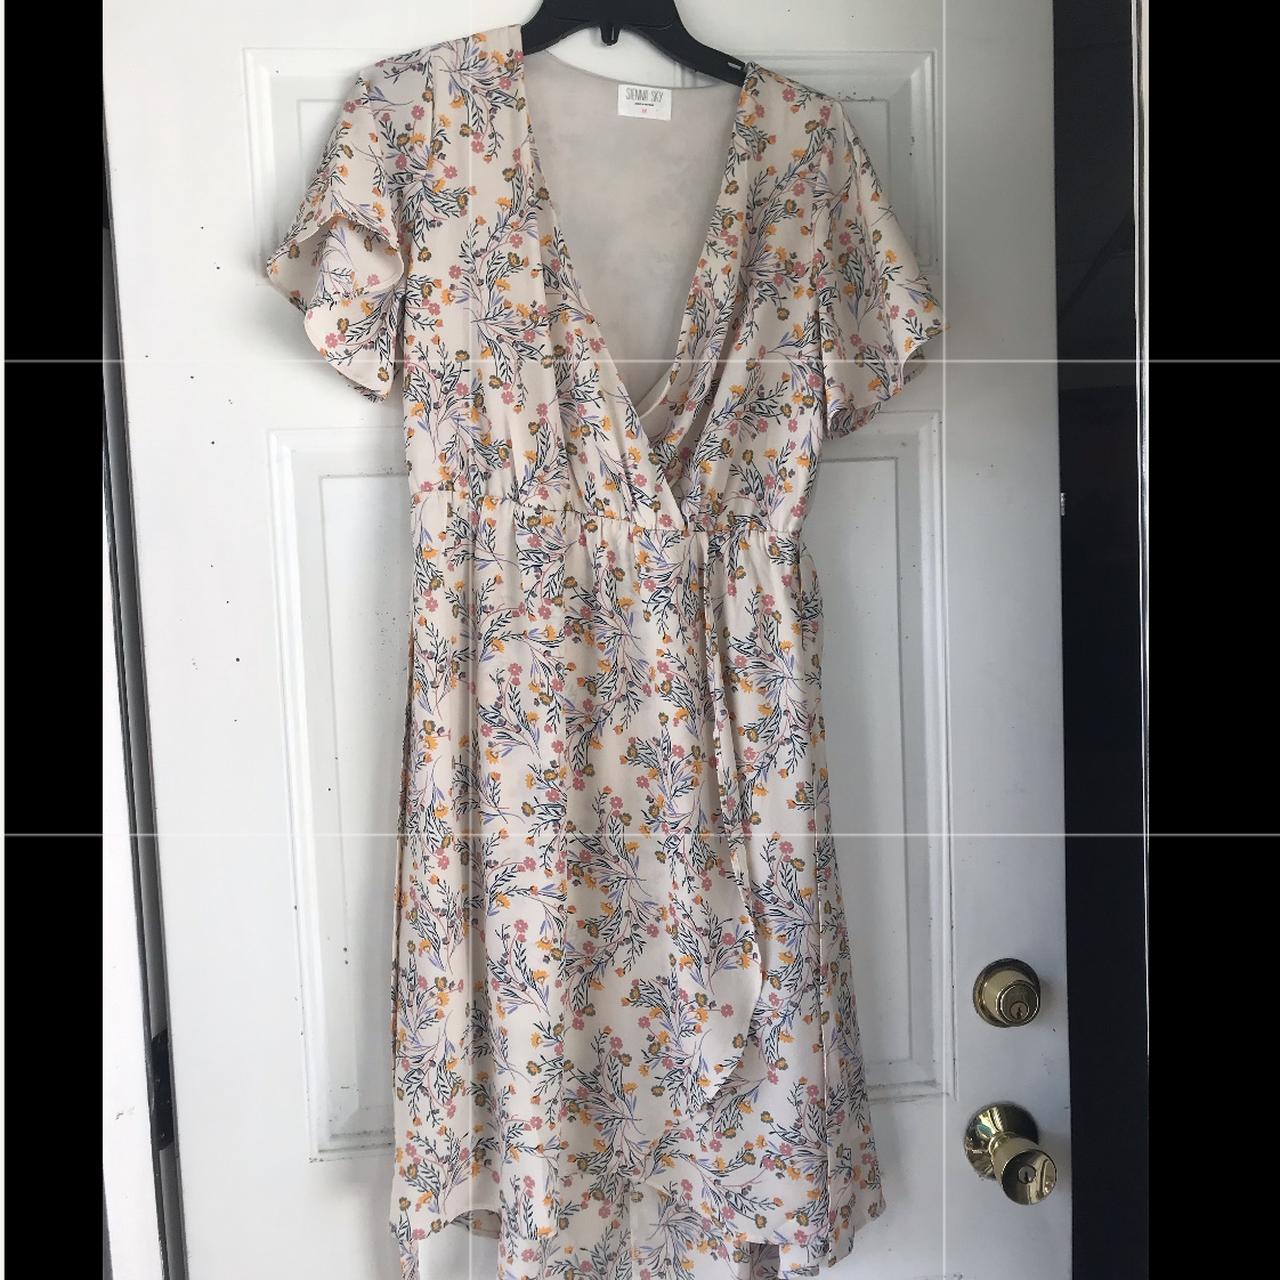 Sienna Sky floral dress great for ...